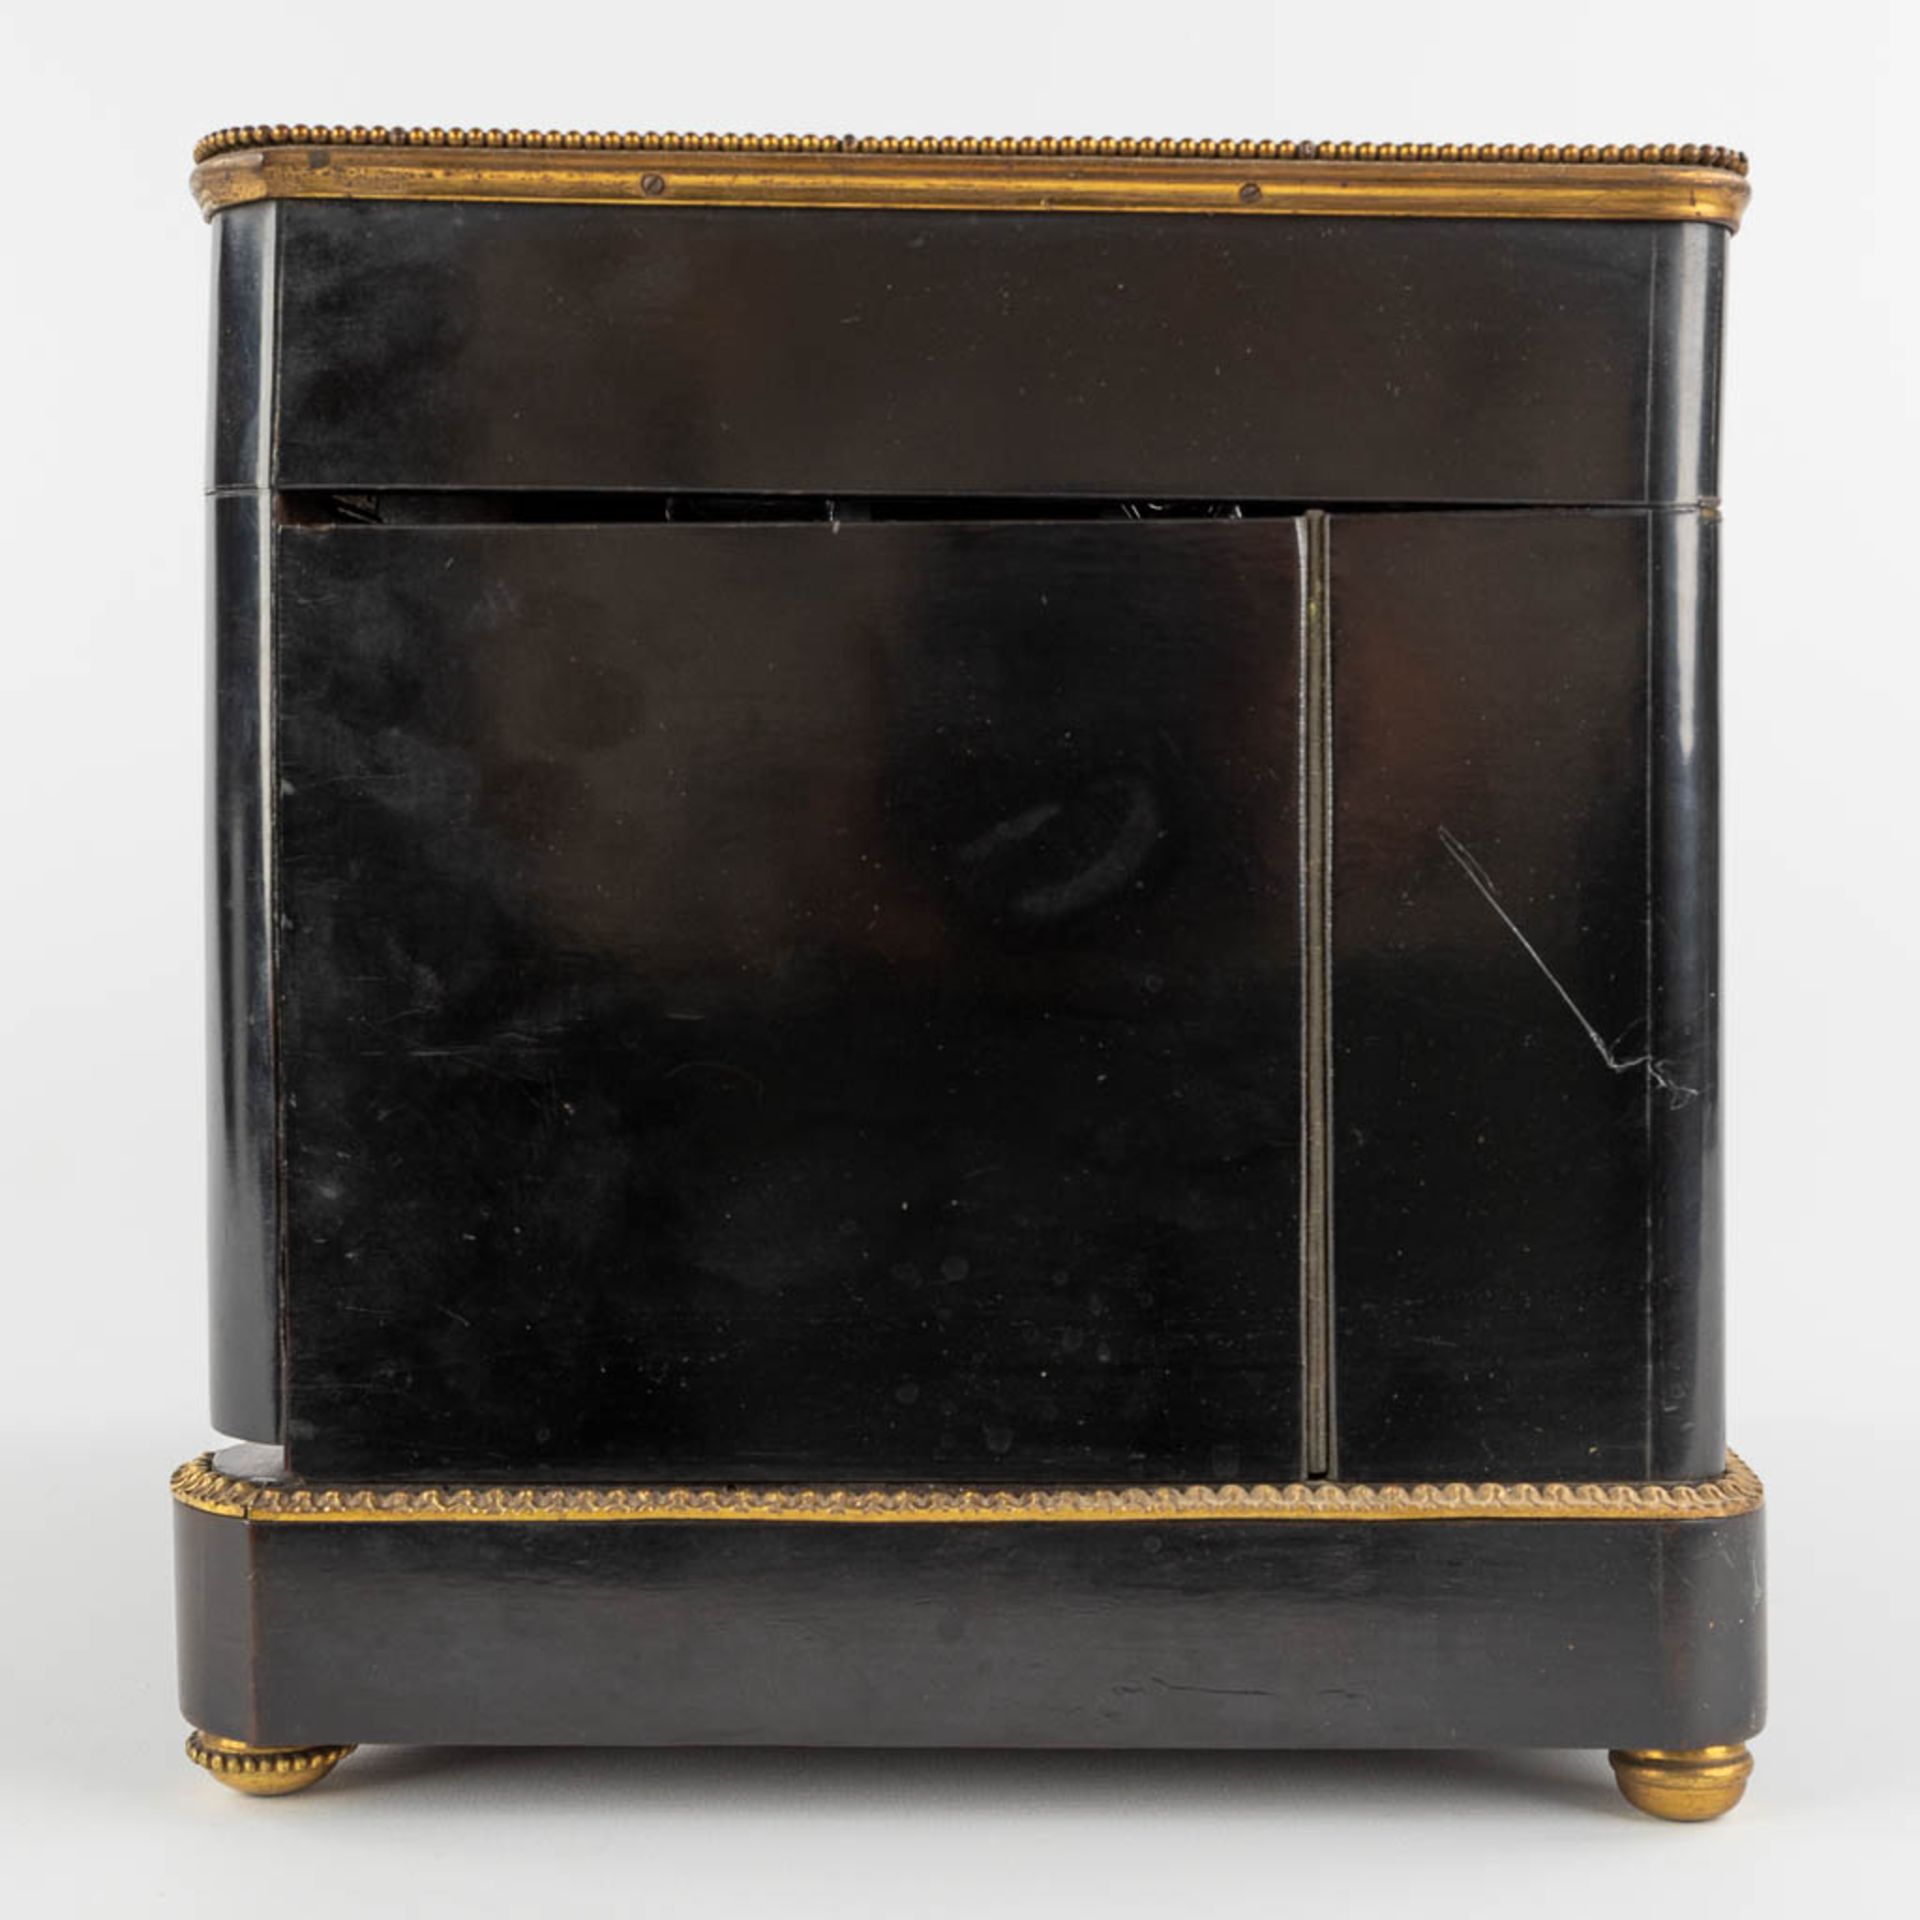 An antique Cave-à-liqueur, liquor box, ebonised wood inlaid with mother of pearl and copper. 19th C. - Image 7 of 16